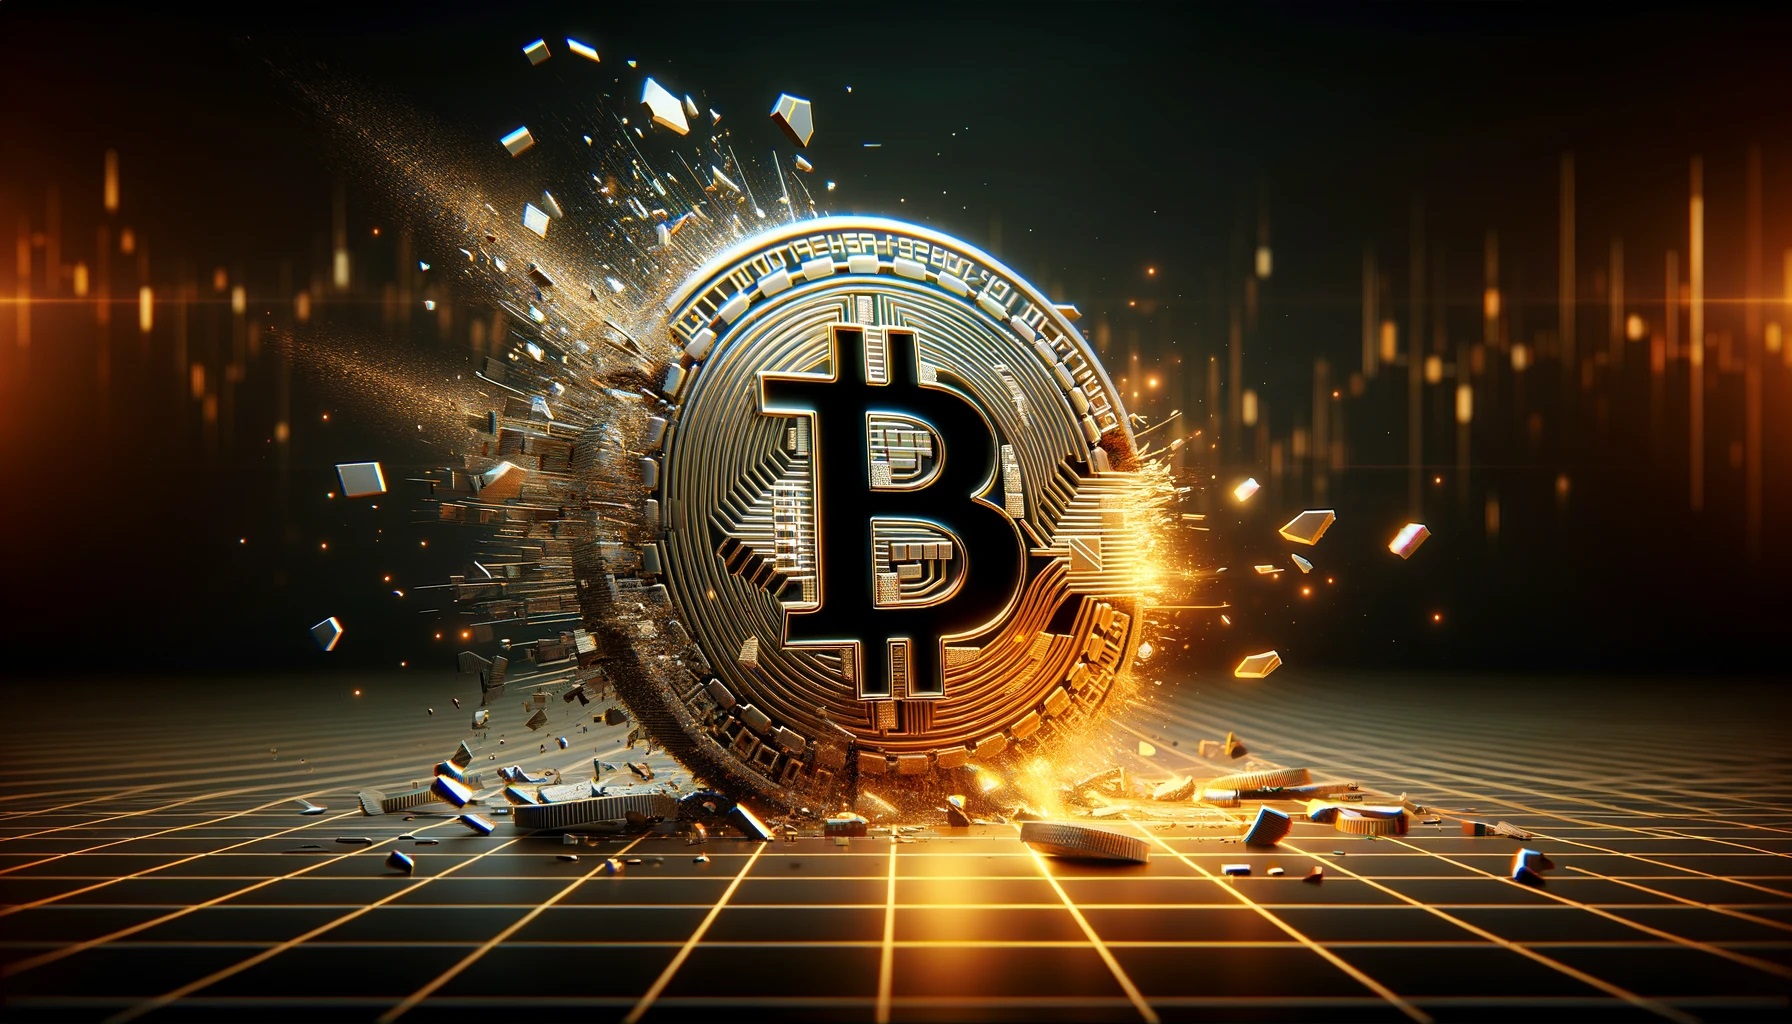 Bitcoin discover fracture worst over